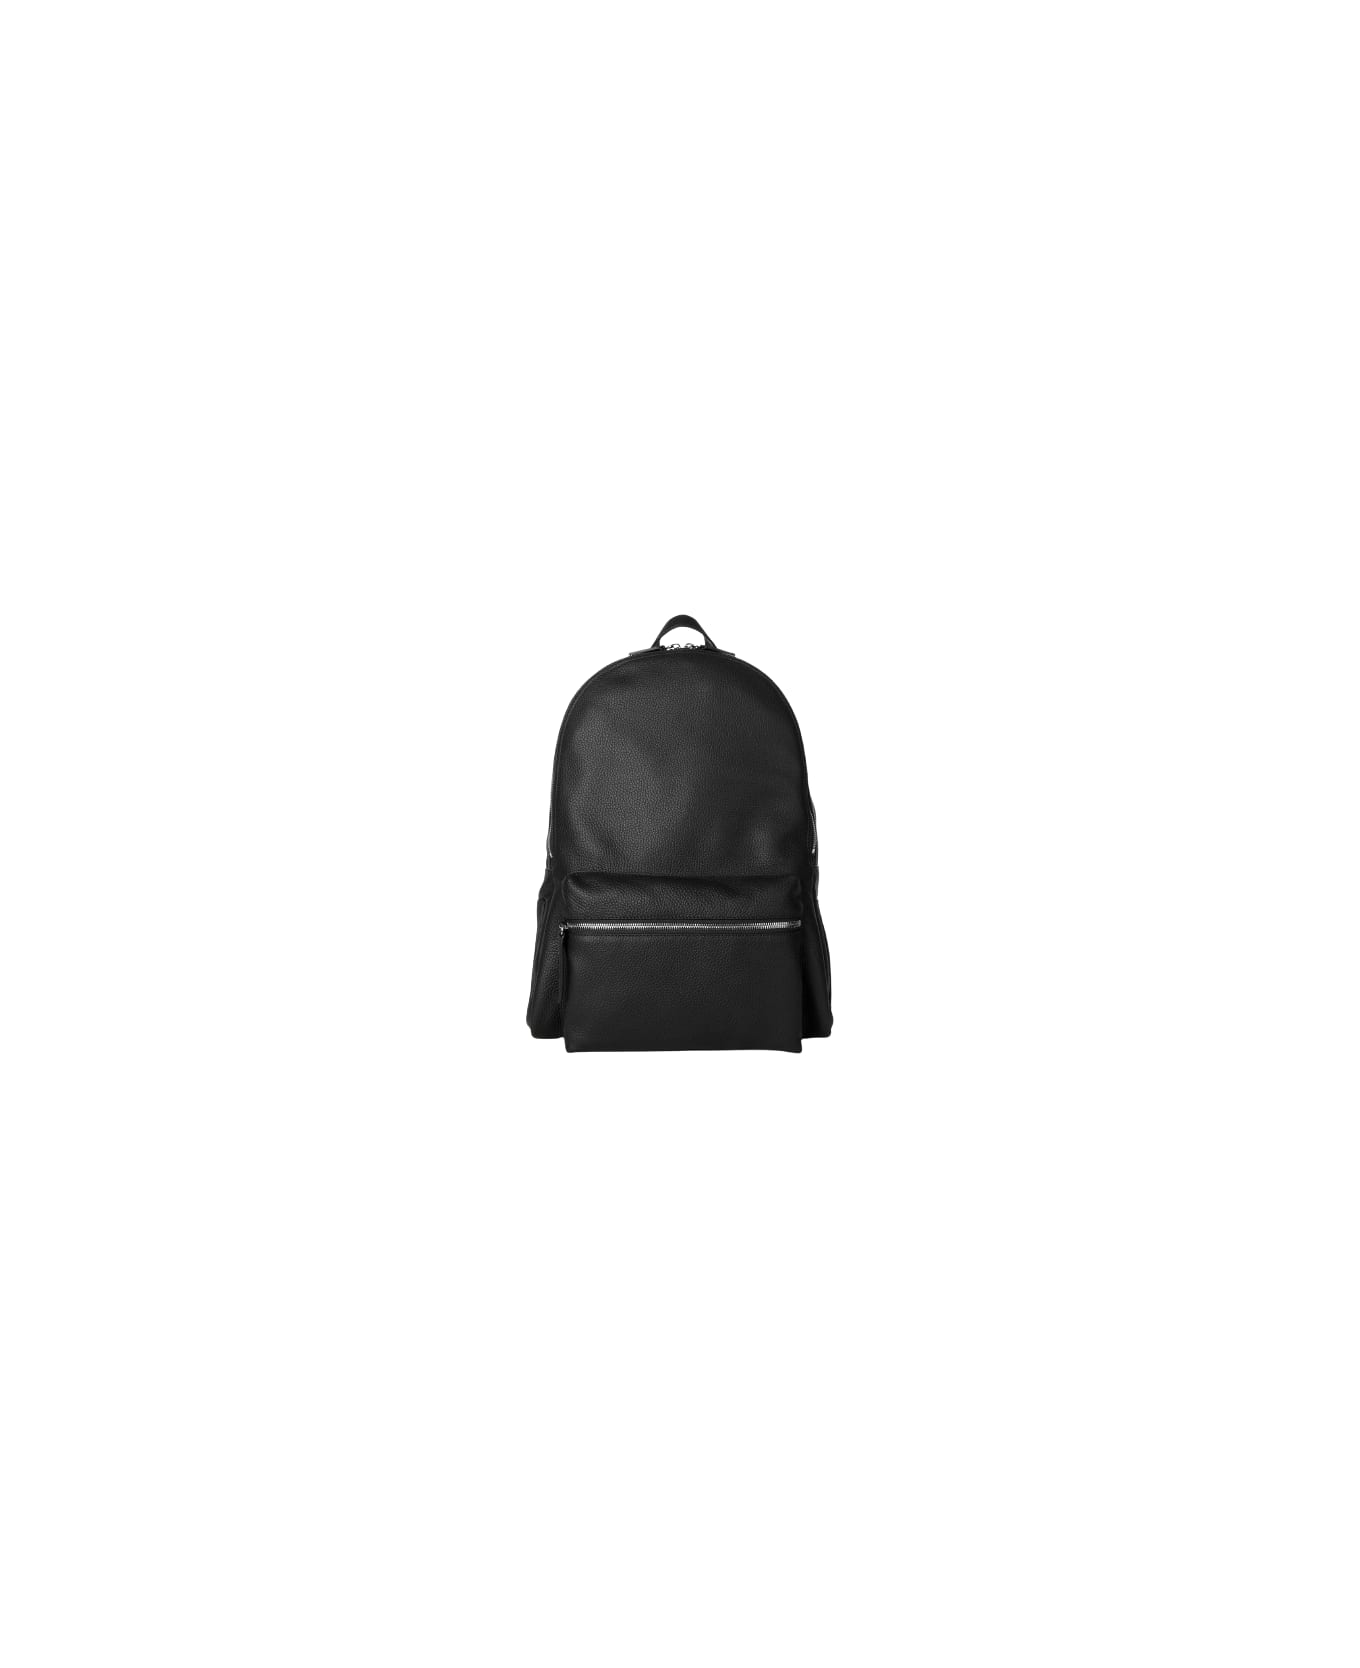 Orciani Backpack - Nero バックパック